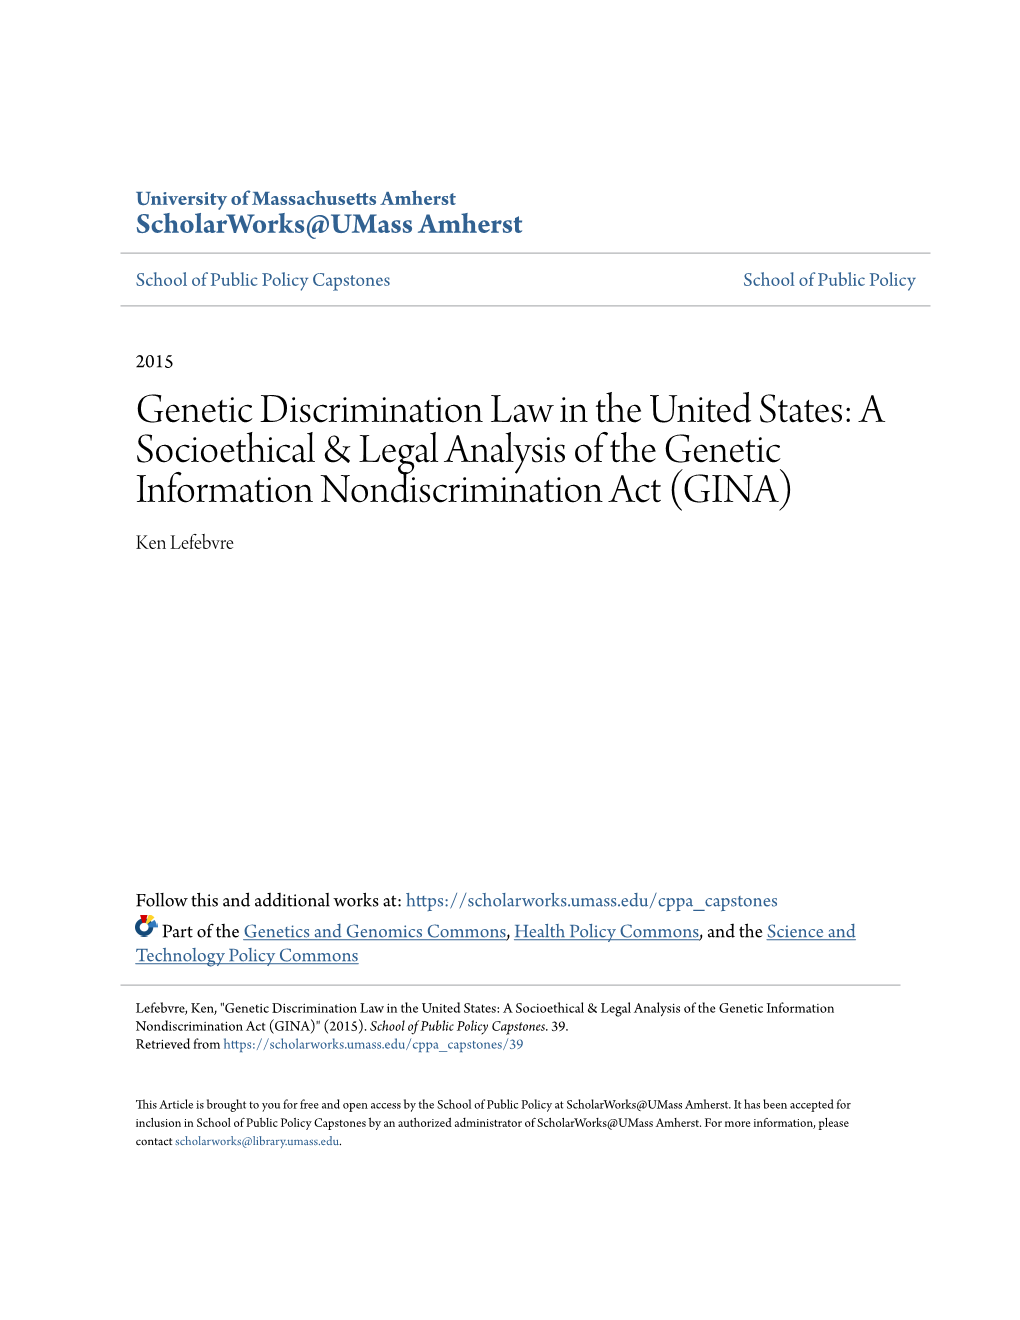 Genetic Discrimination Law in the United States: a Socioethical & Legal Analysis of the Genetic Information Nondiscrimination Act (GINA) Ken Lefebvre